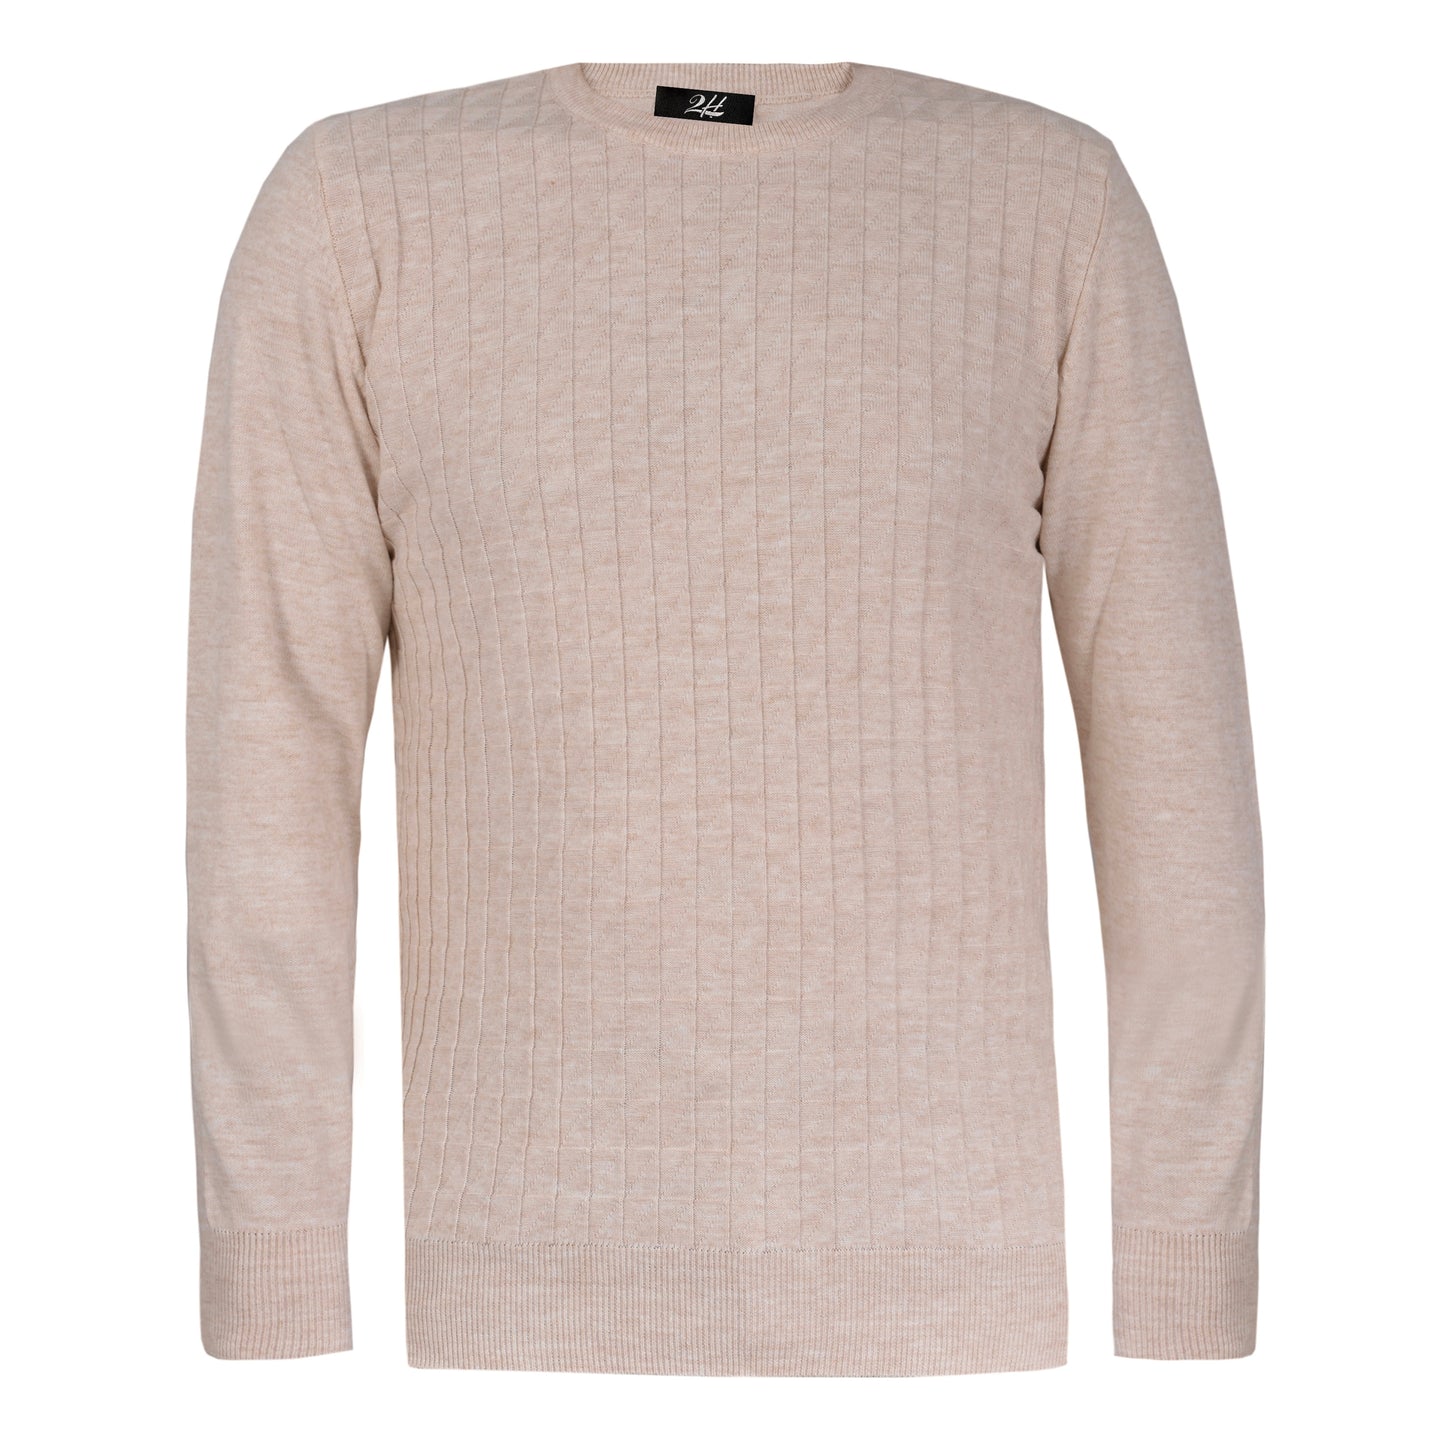 2H Beige Small Squareds  Knitted Round Neck Sweater